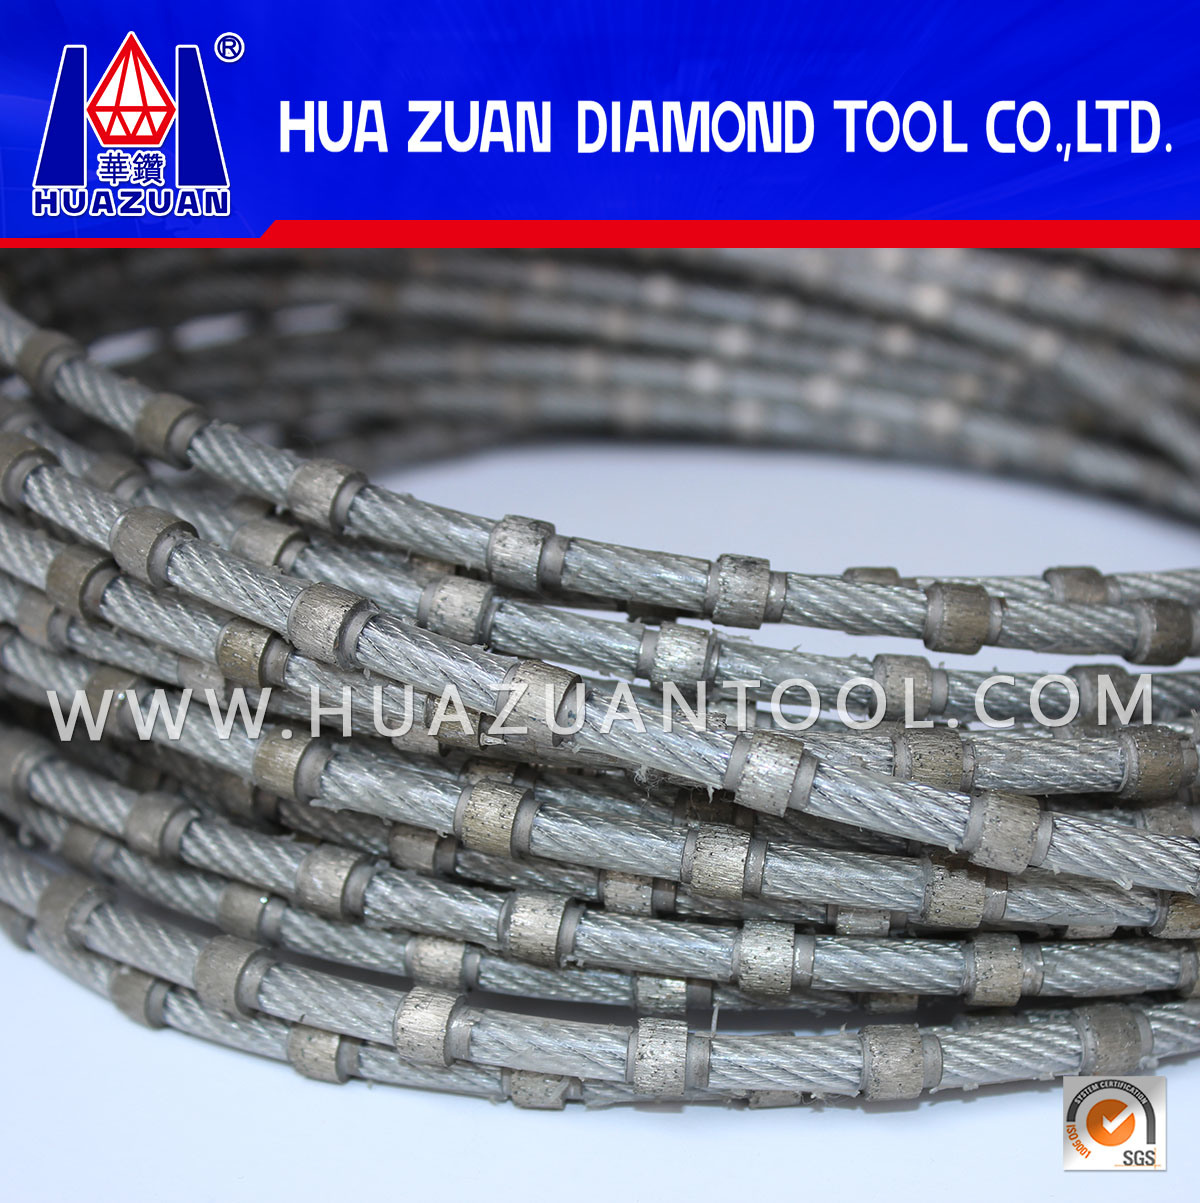 Qualitied Diamond Cutting Wire Saw for Marble Block Squaring